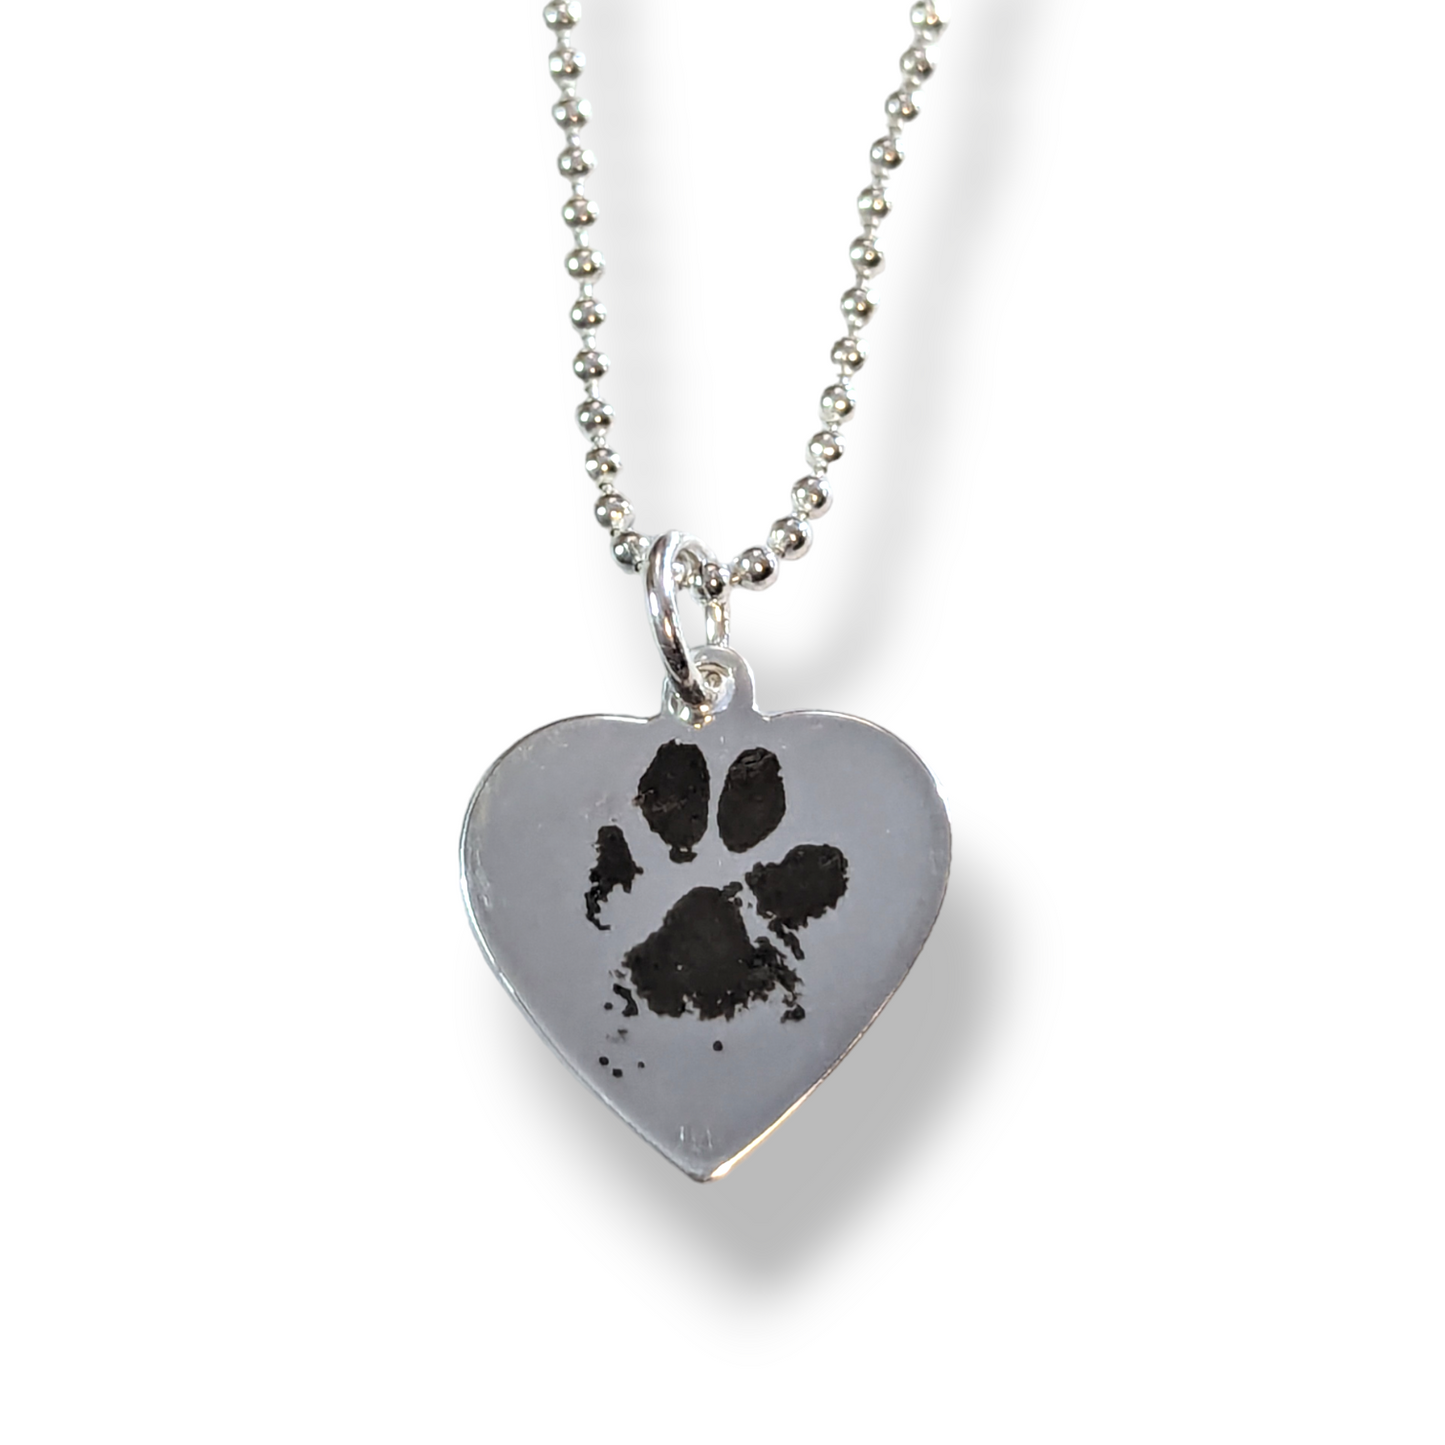 Engraved Paw Print Heart Necklace